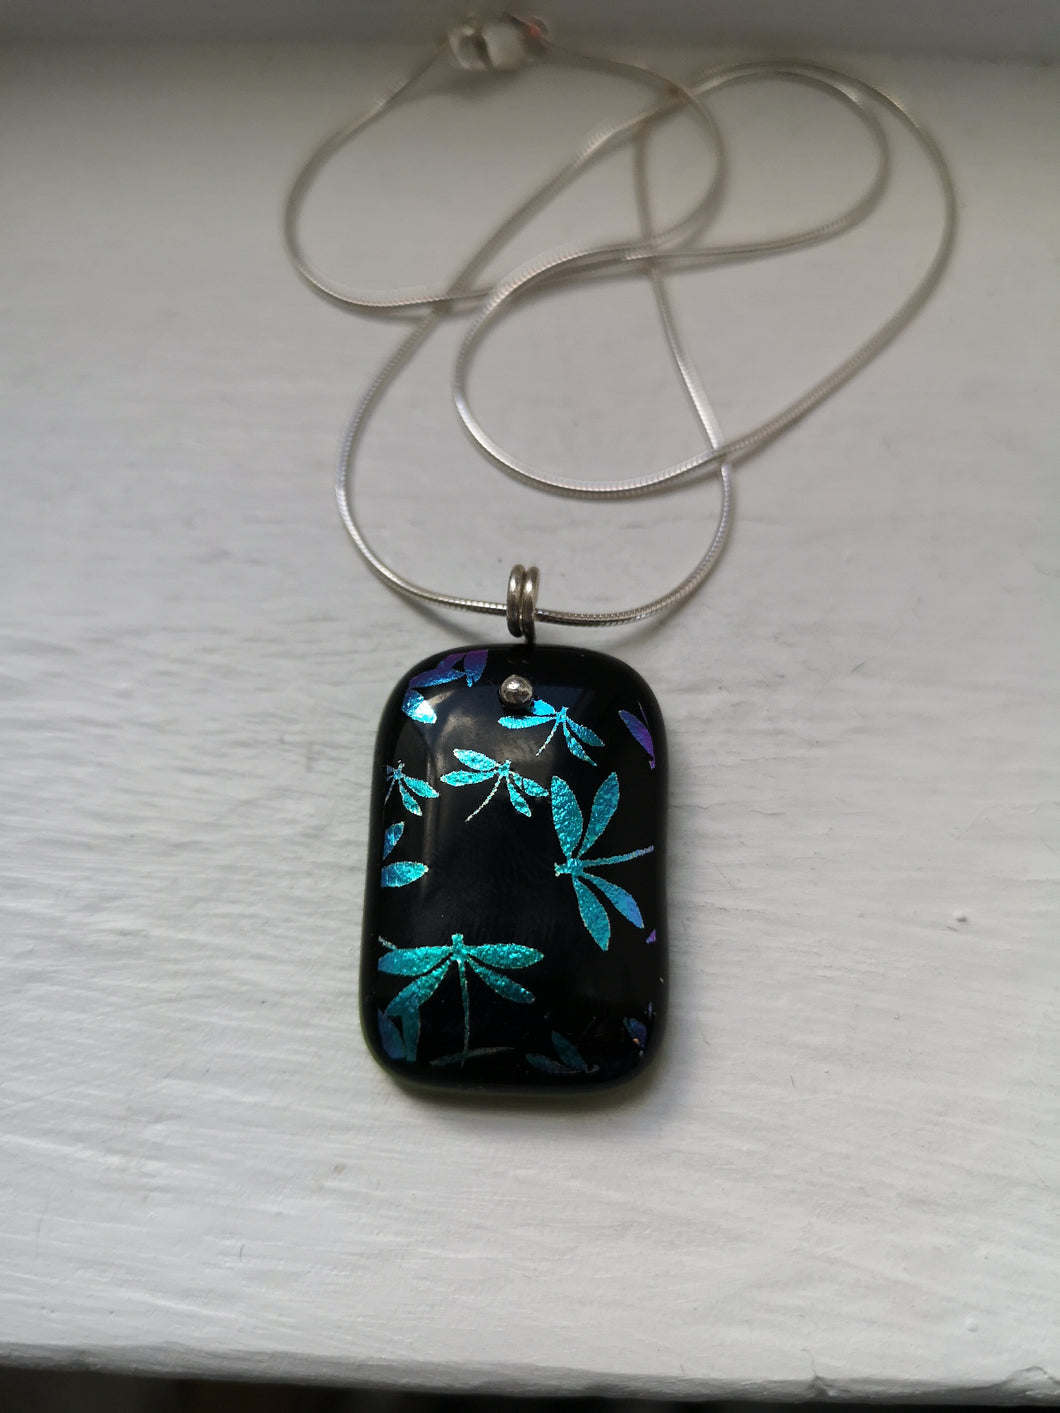 Dragonfly dichroic glass pendant with handmade silver fittings & silver snake chain